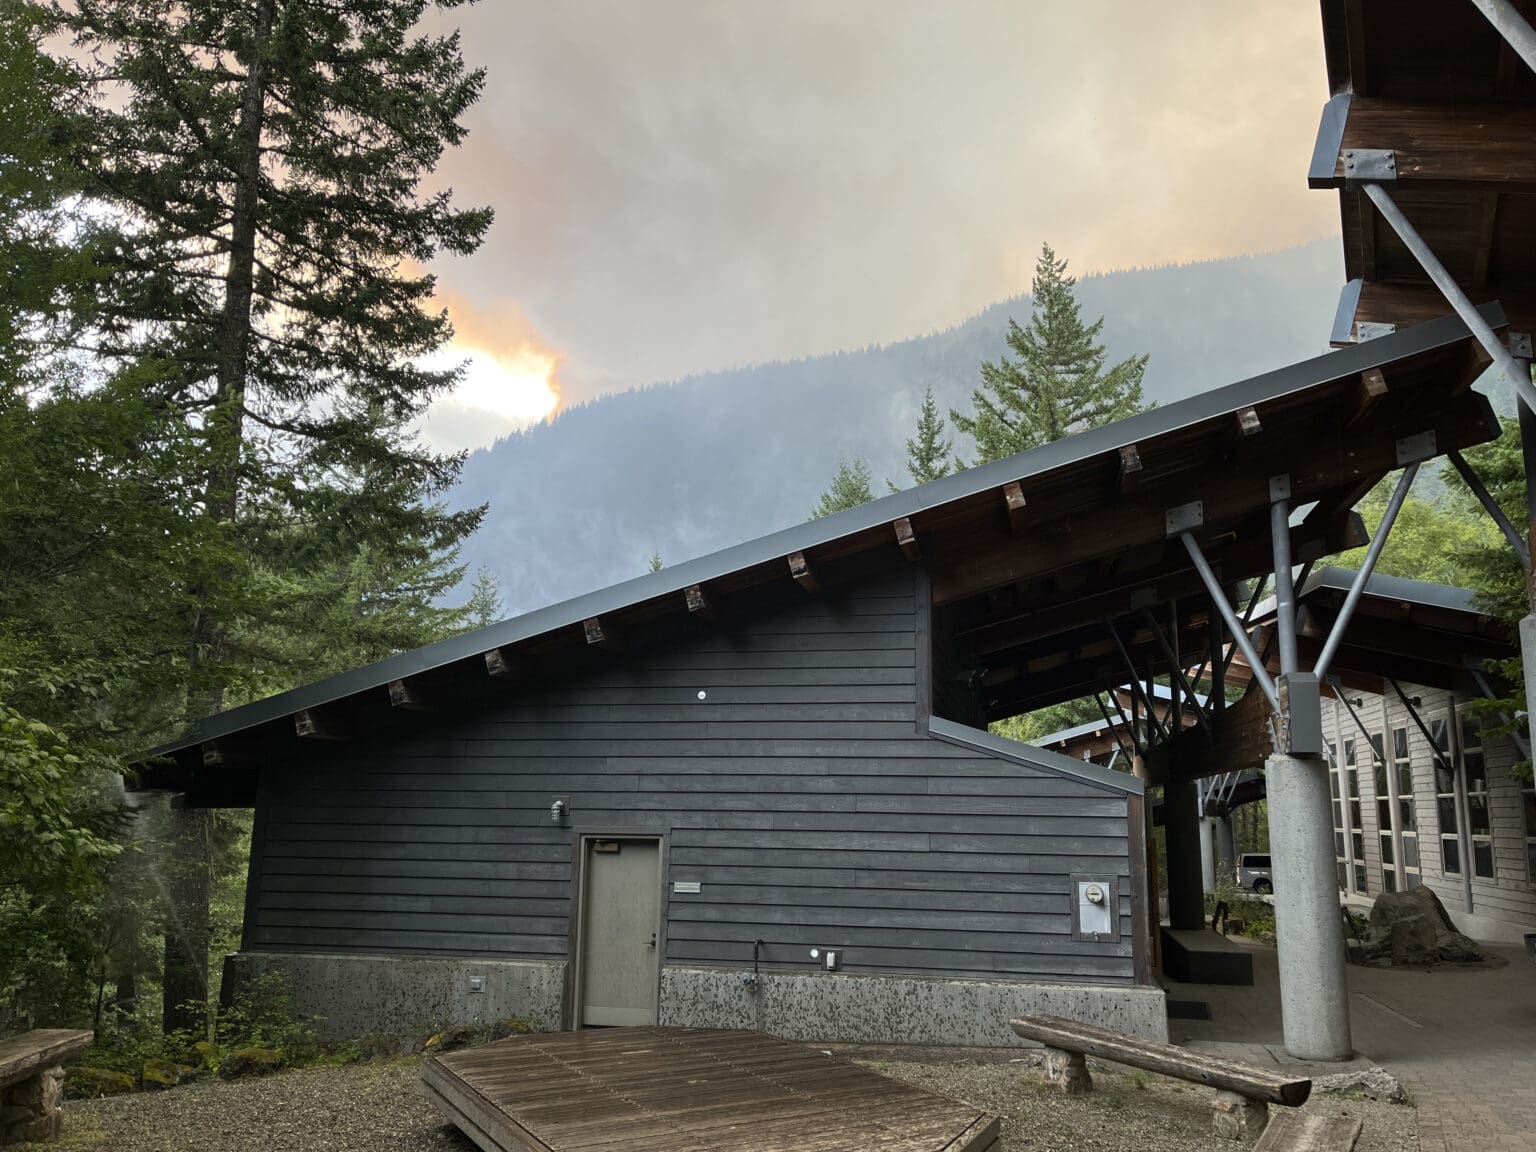 The North Cascades Institute's Environmental Learning Center campus pictured in August 2023 with the Sourdough Fire burning nearby. The center canceled all of its on-site programs for the rest of the year